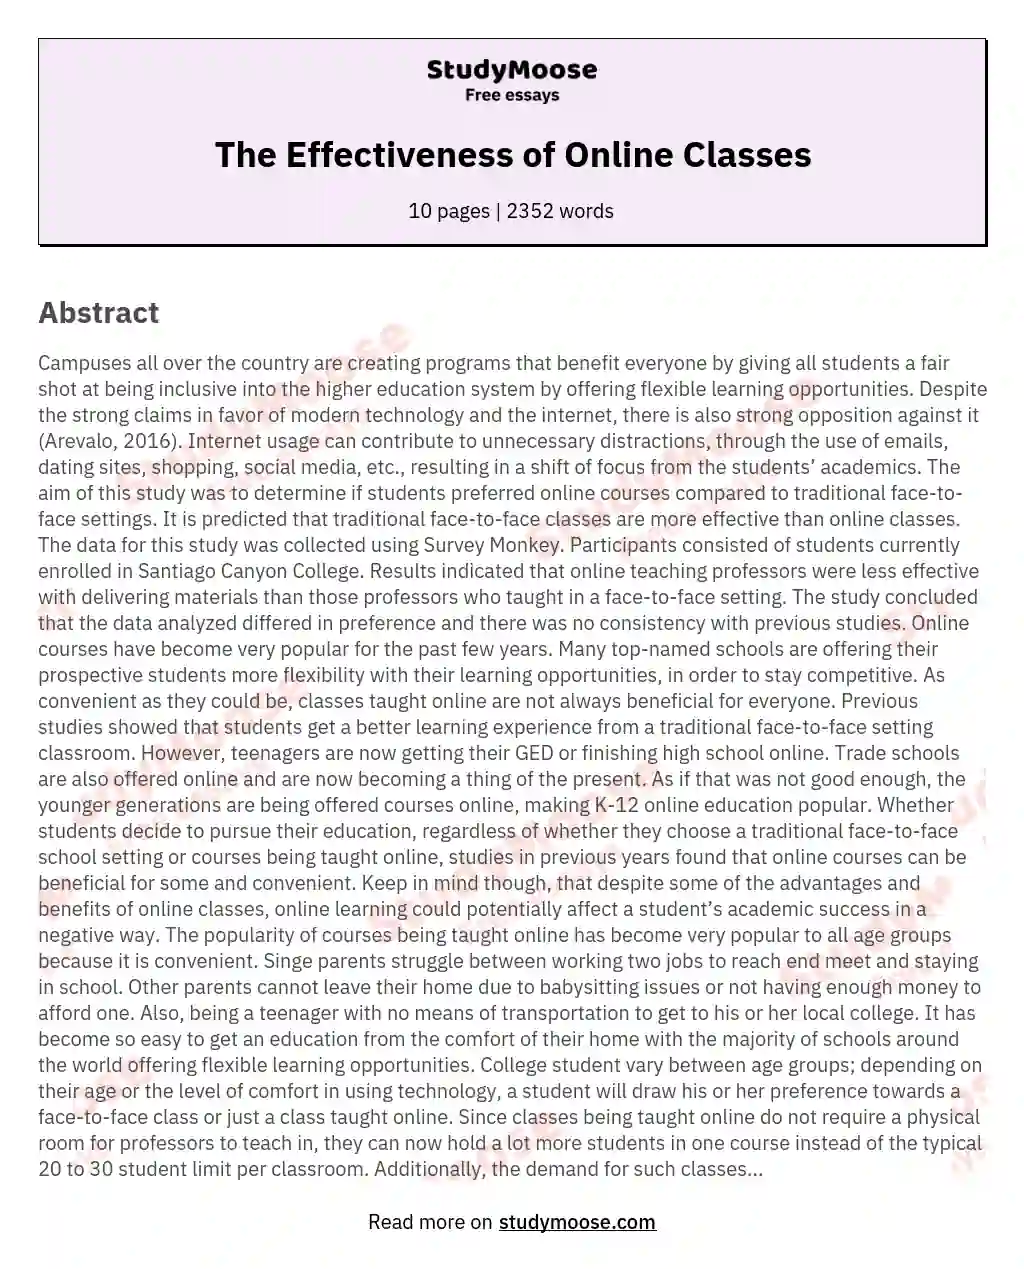 The Effectiveness of Online Classes